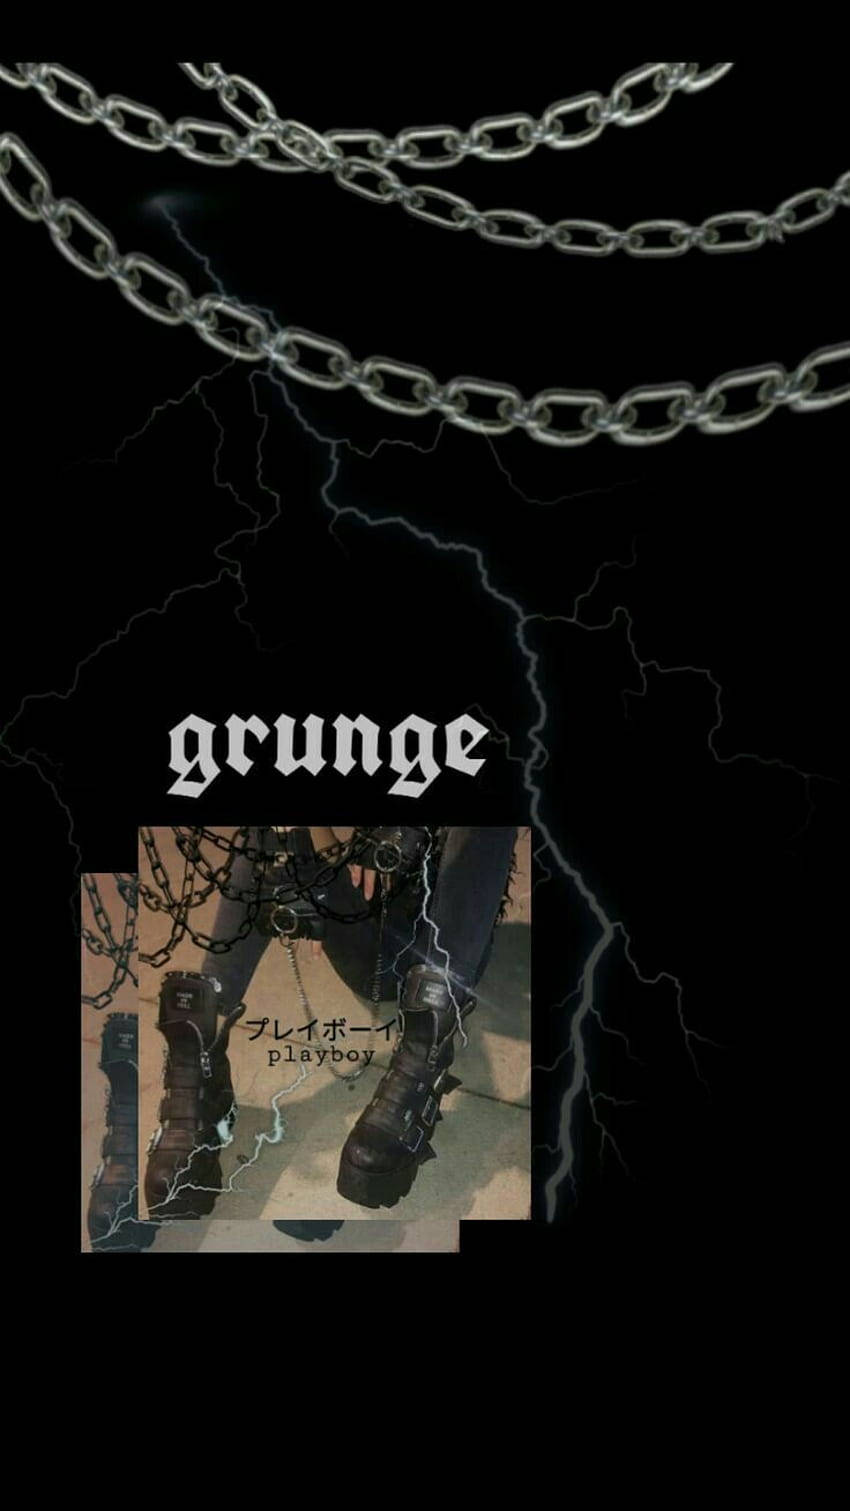 Express yourself in Grunge Emo Aesthetic Wallpaper